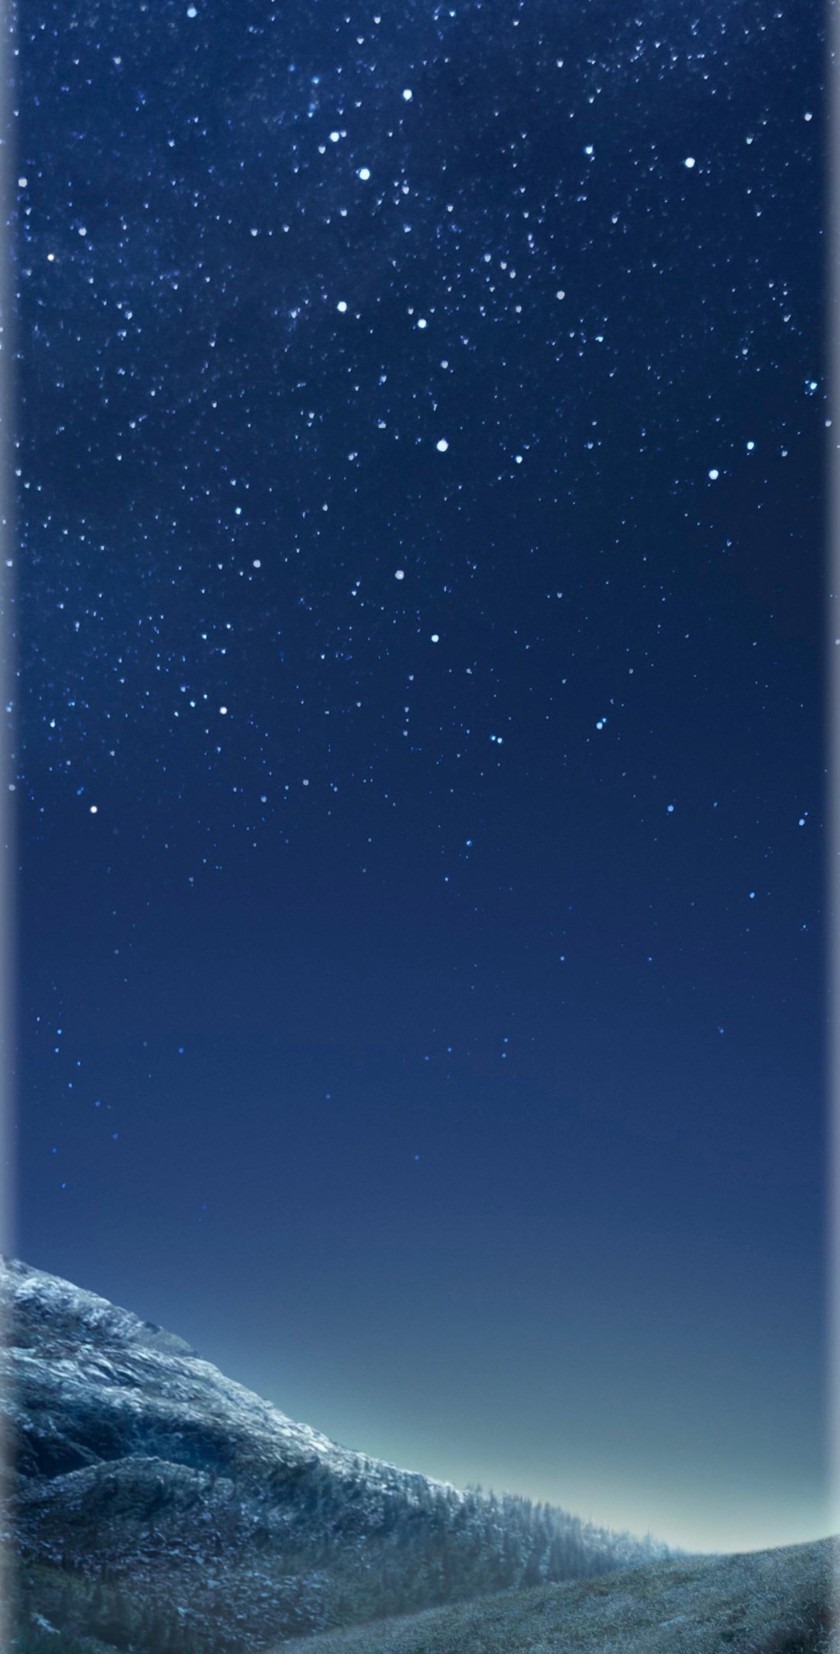 These Samsung Galaxy S8 Stock Wallpaper